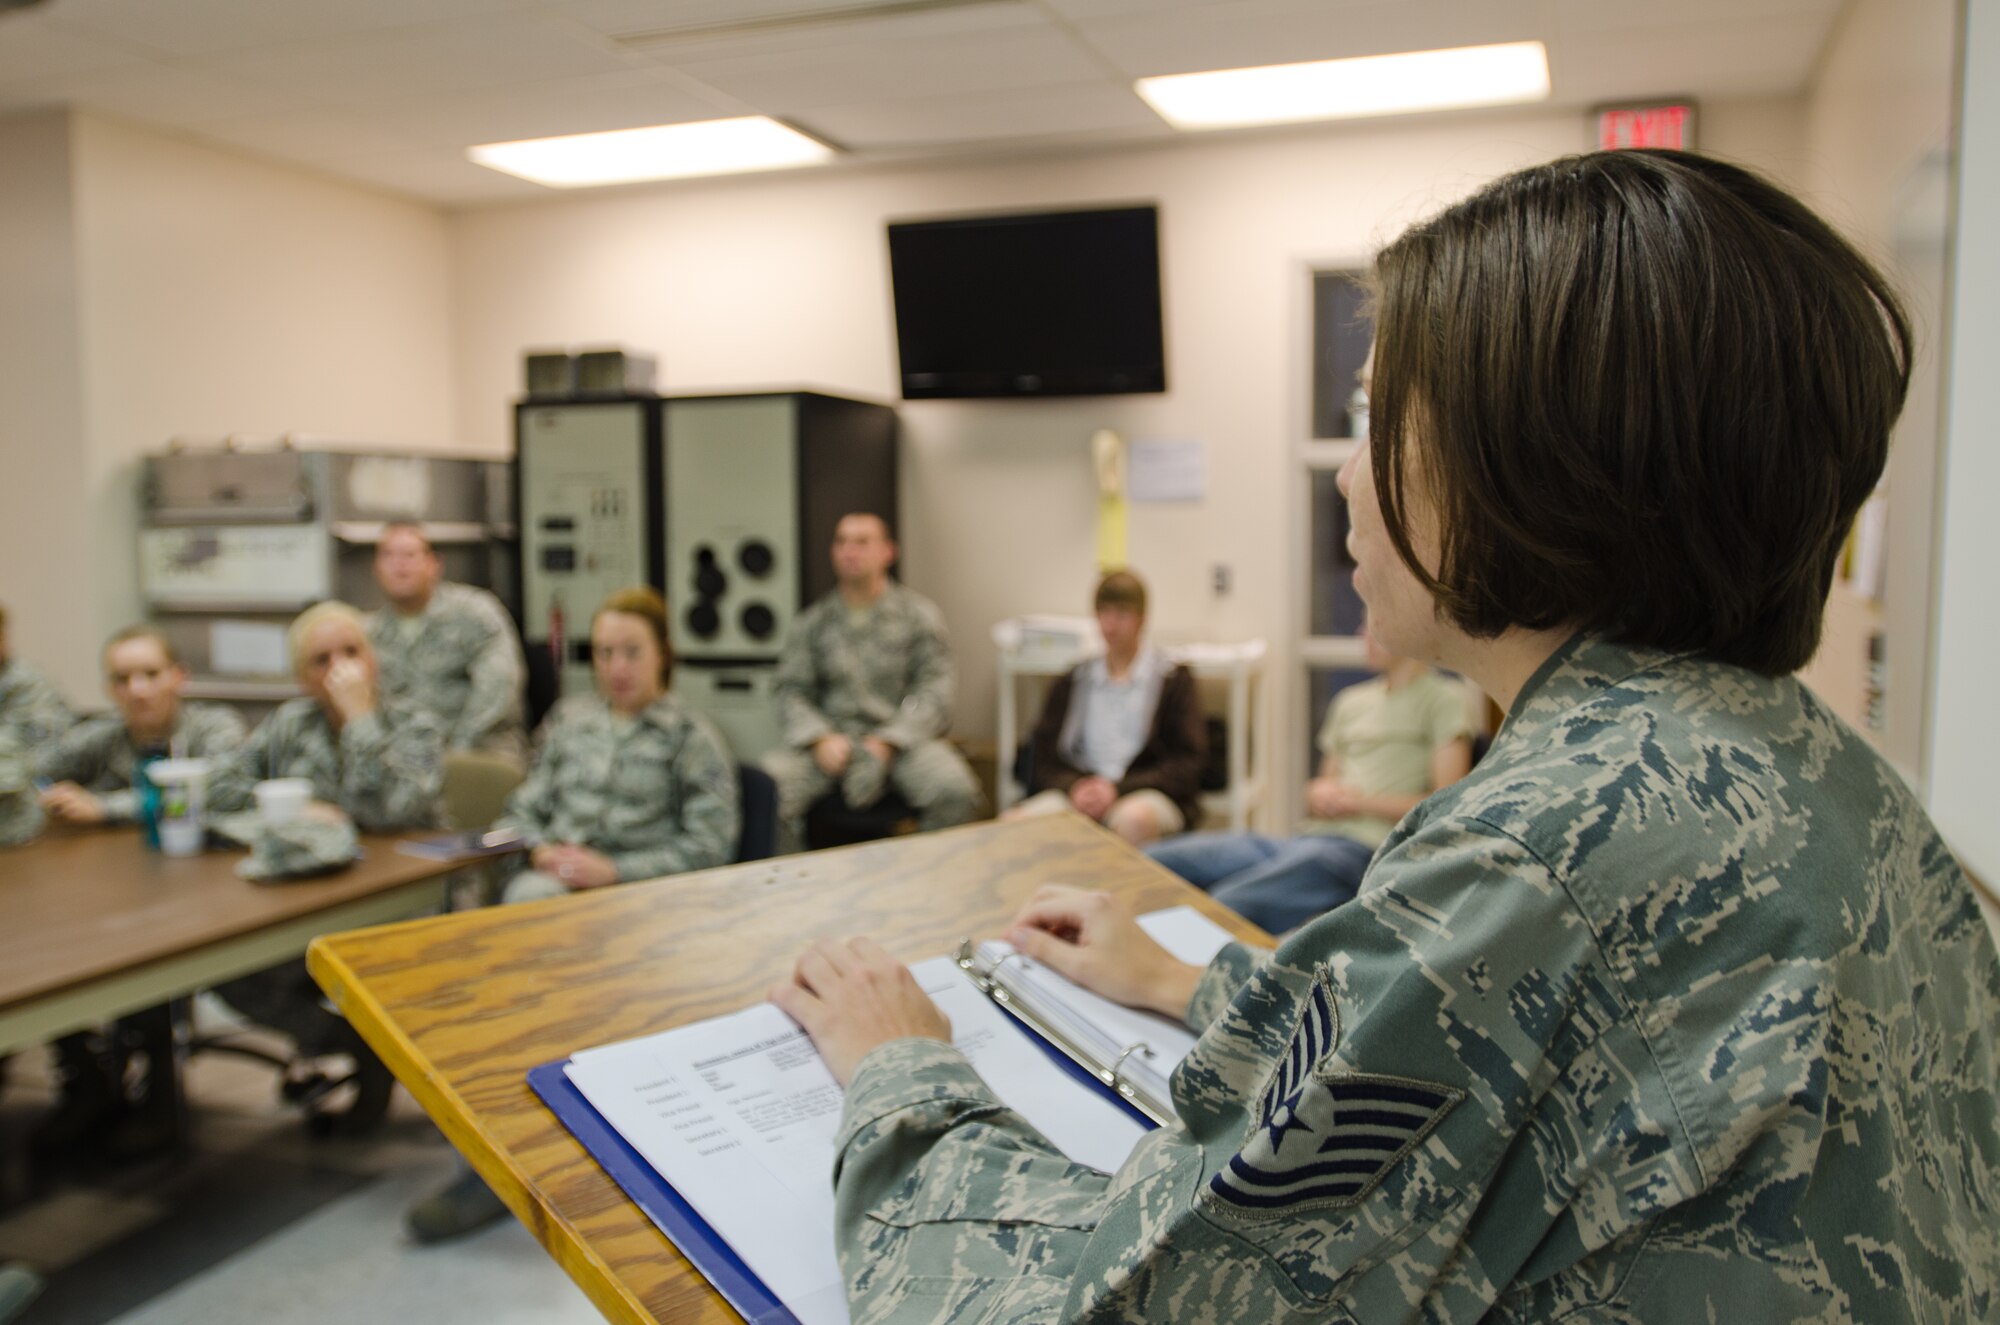 Tech. Sgt. Jessica Montesono addresses the Junior Enlisted Council for the 139th Airlift, Saturday October 1, 2011.  The Junior Enlisted Council assits the needs of all enlisted on the base.  (U.S. Air Force photo by Airman First Class Kelsey Stuart)